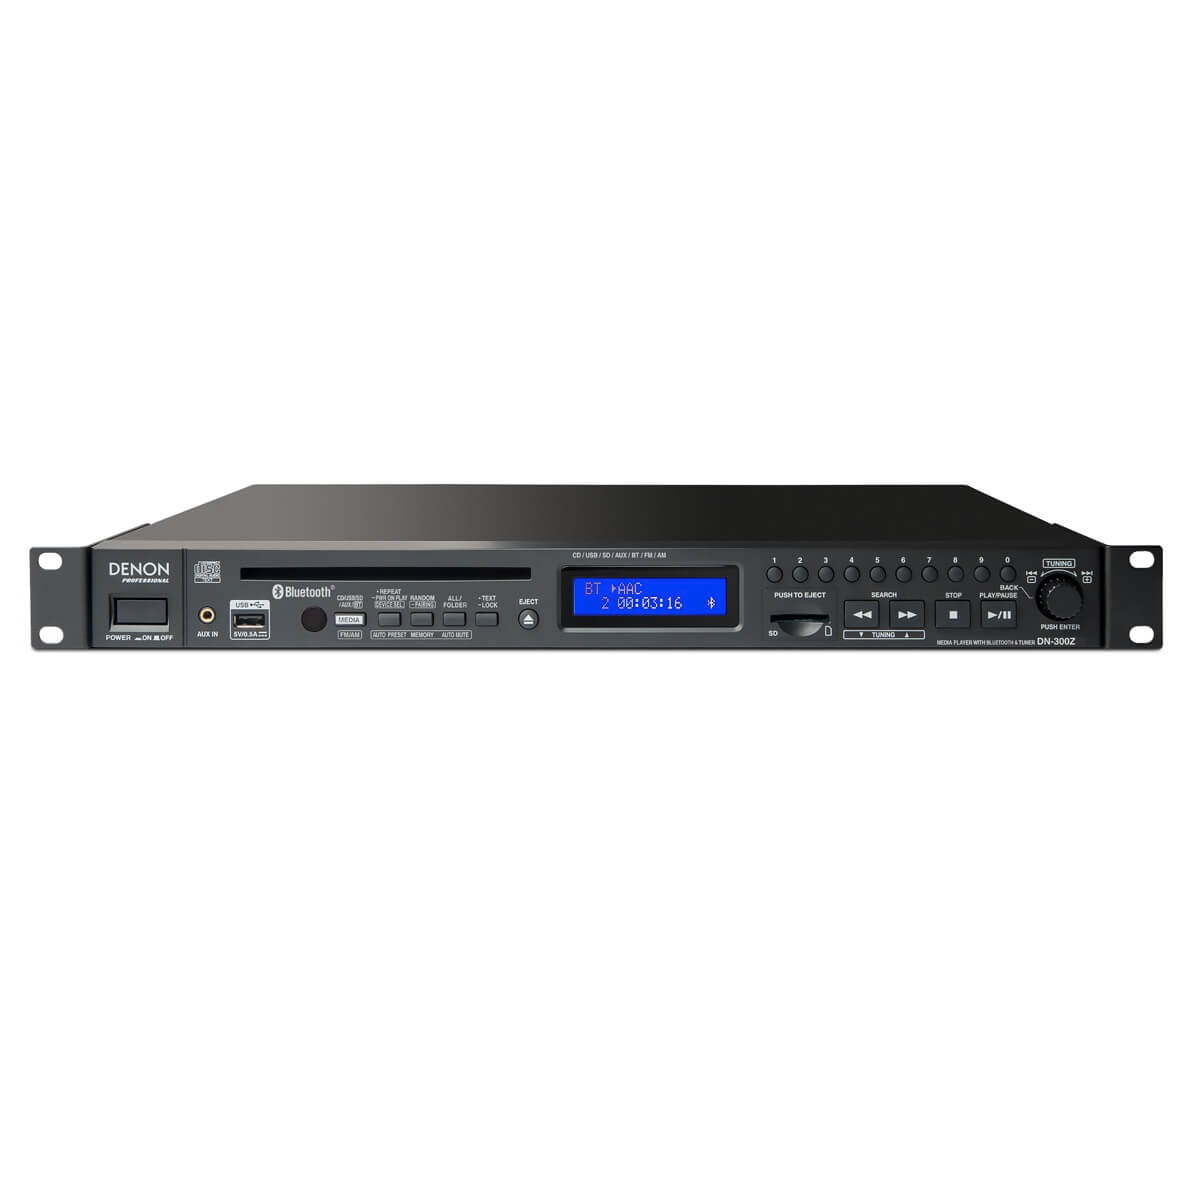 Denon DN-300Z Media Player with Bluetooth Receiver and AM/FM Tuner, front